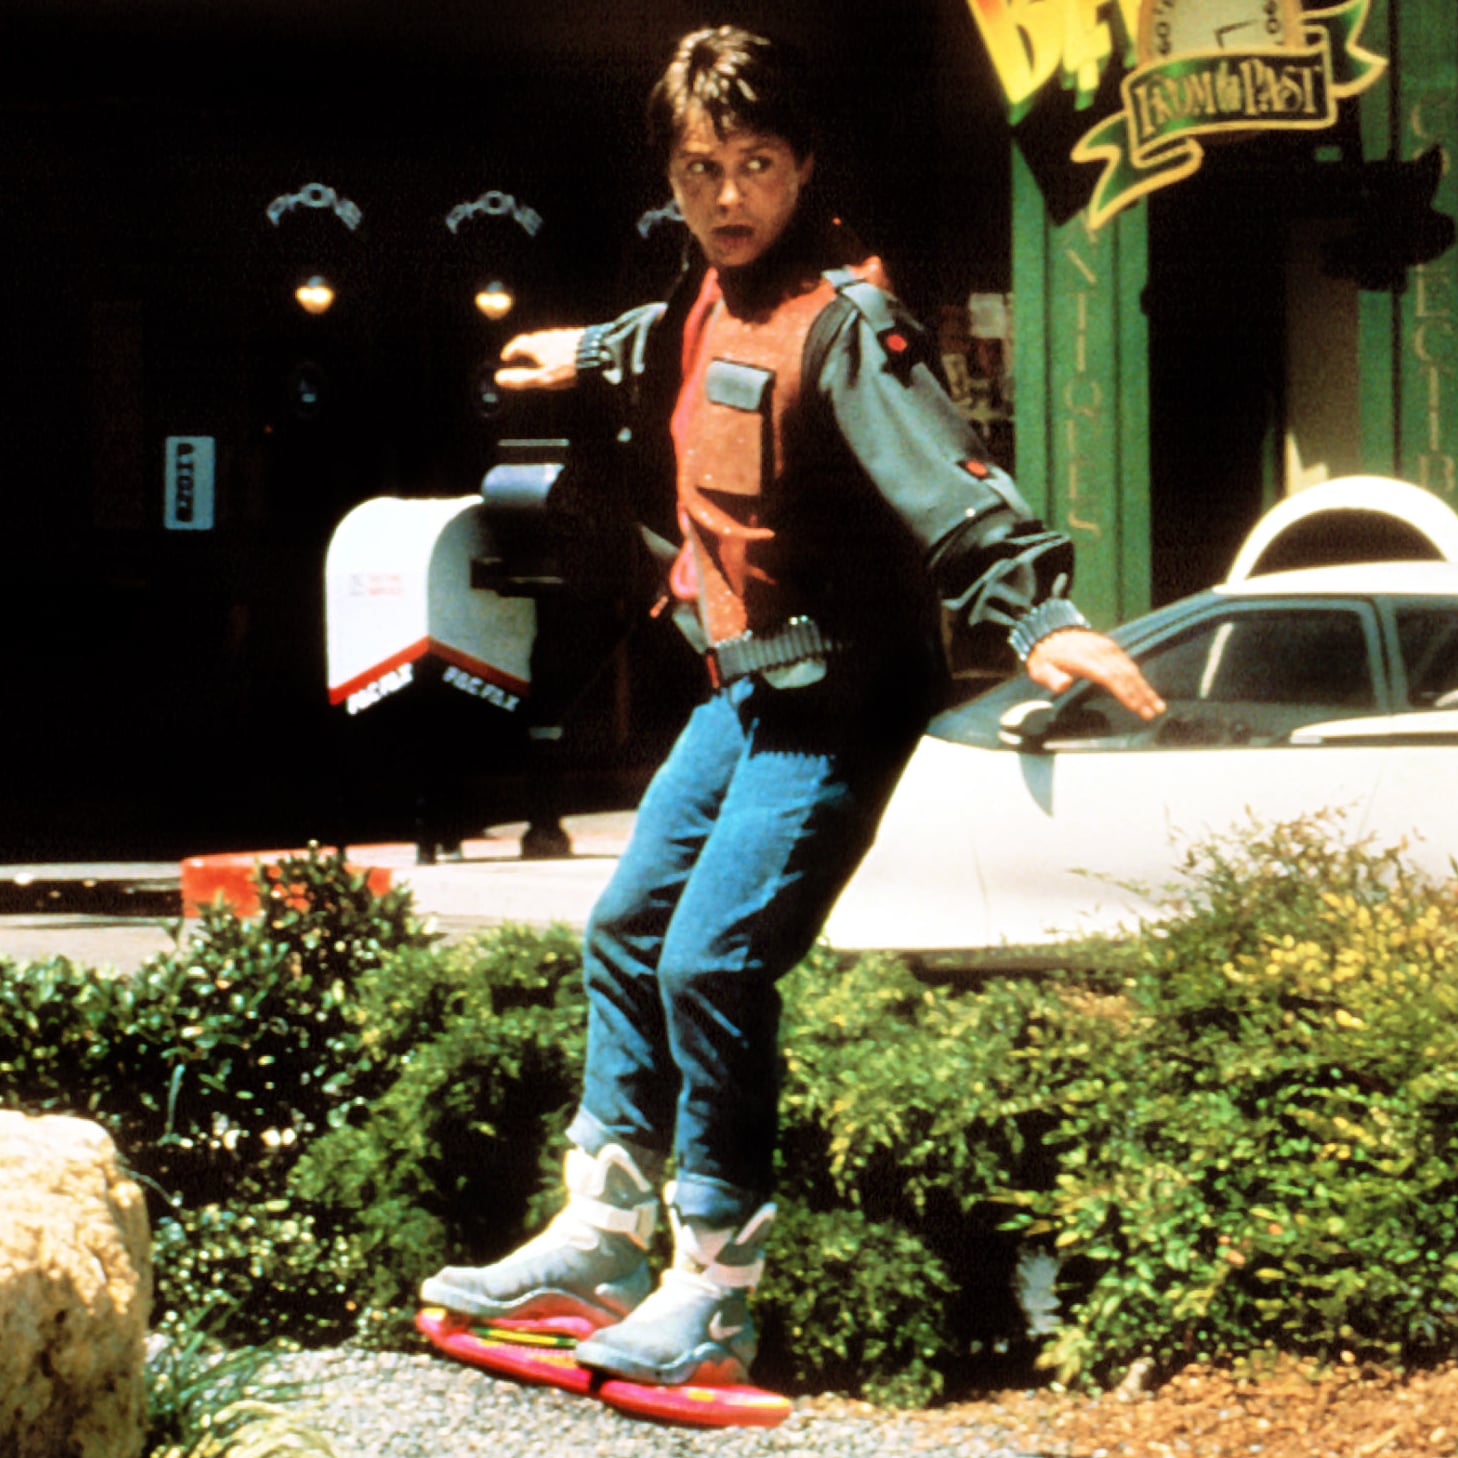 nike trainers back to the future